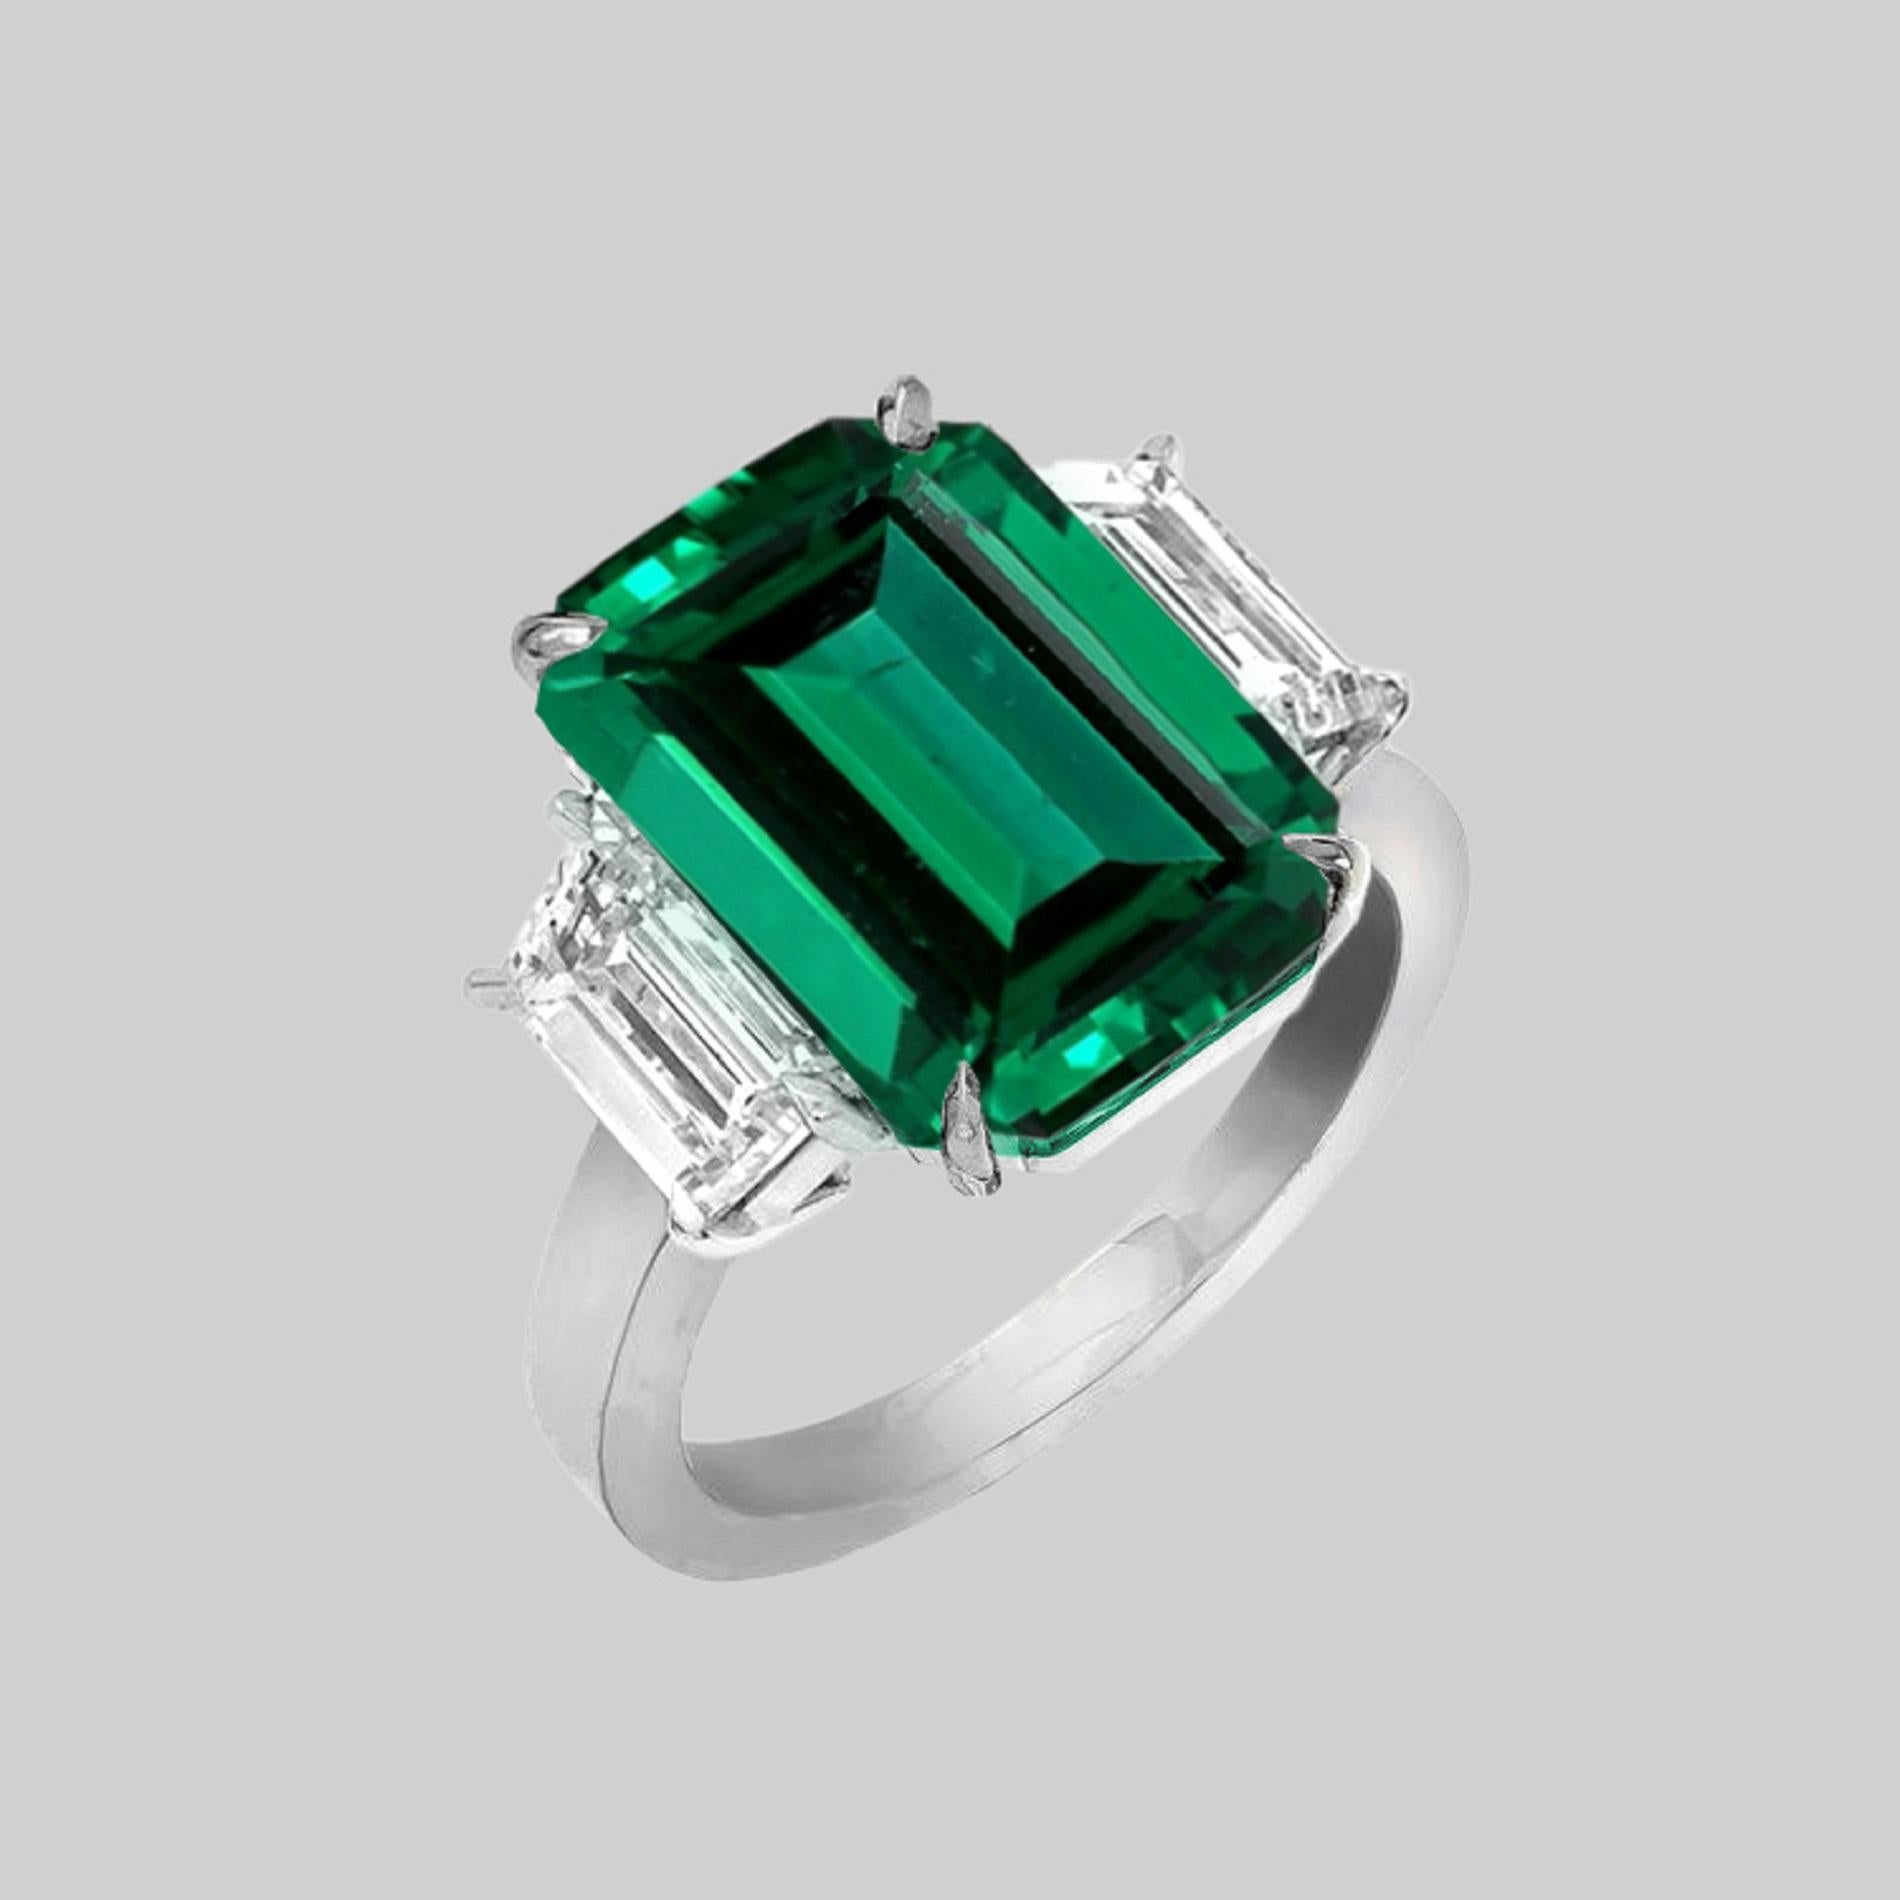 Modern Handmade in Italy GIA Certified 4 Carat Green Emerald Diamond Platinum Ring For Sale